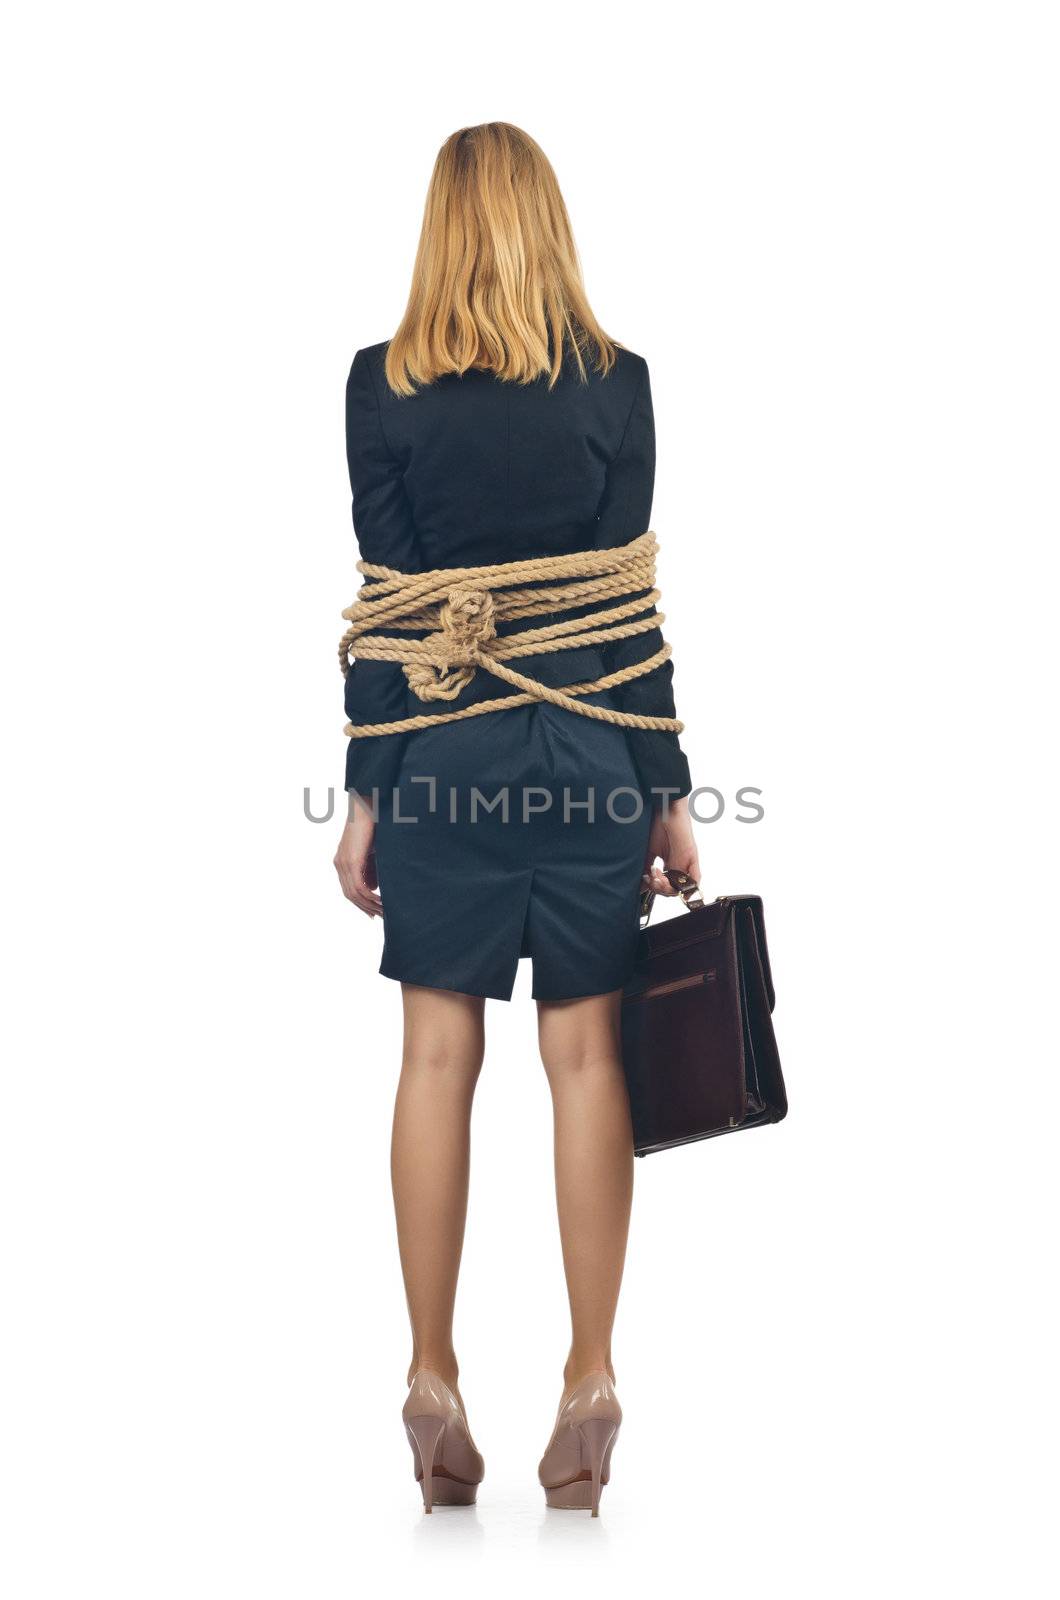 Tied woman in business concept by Elnur